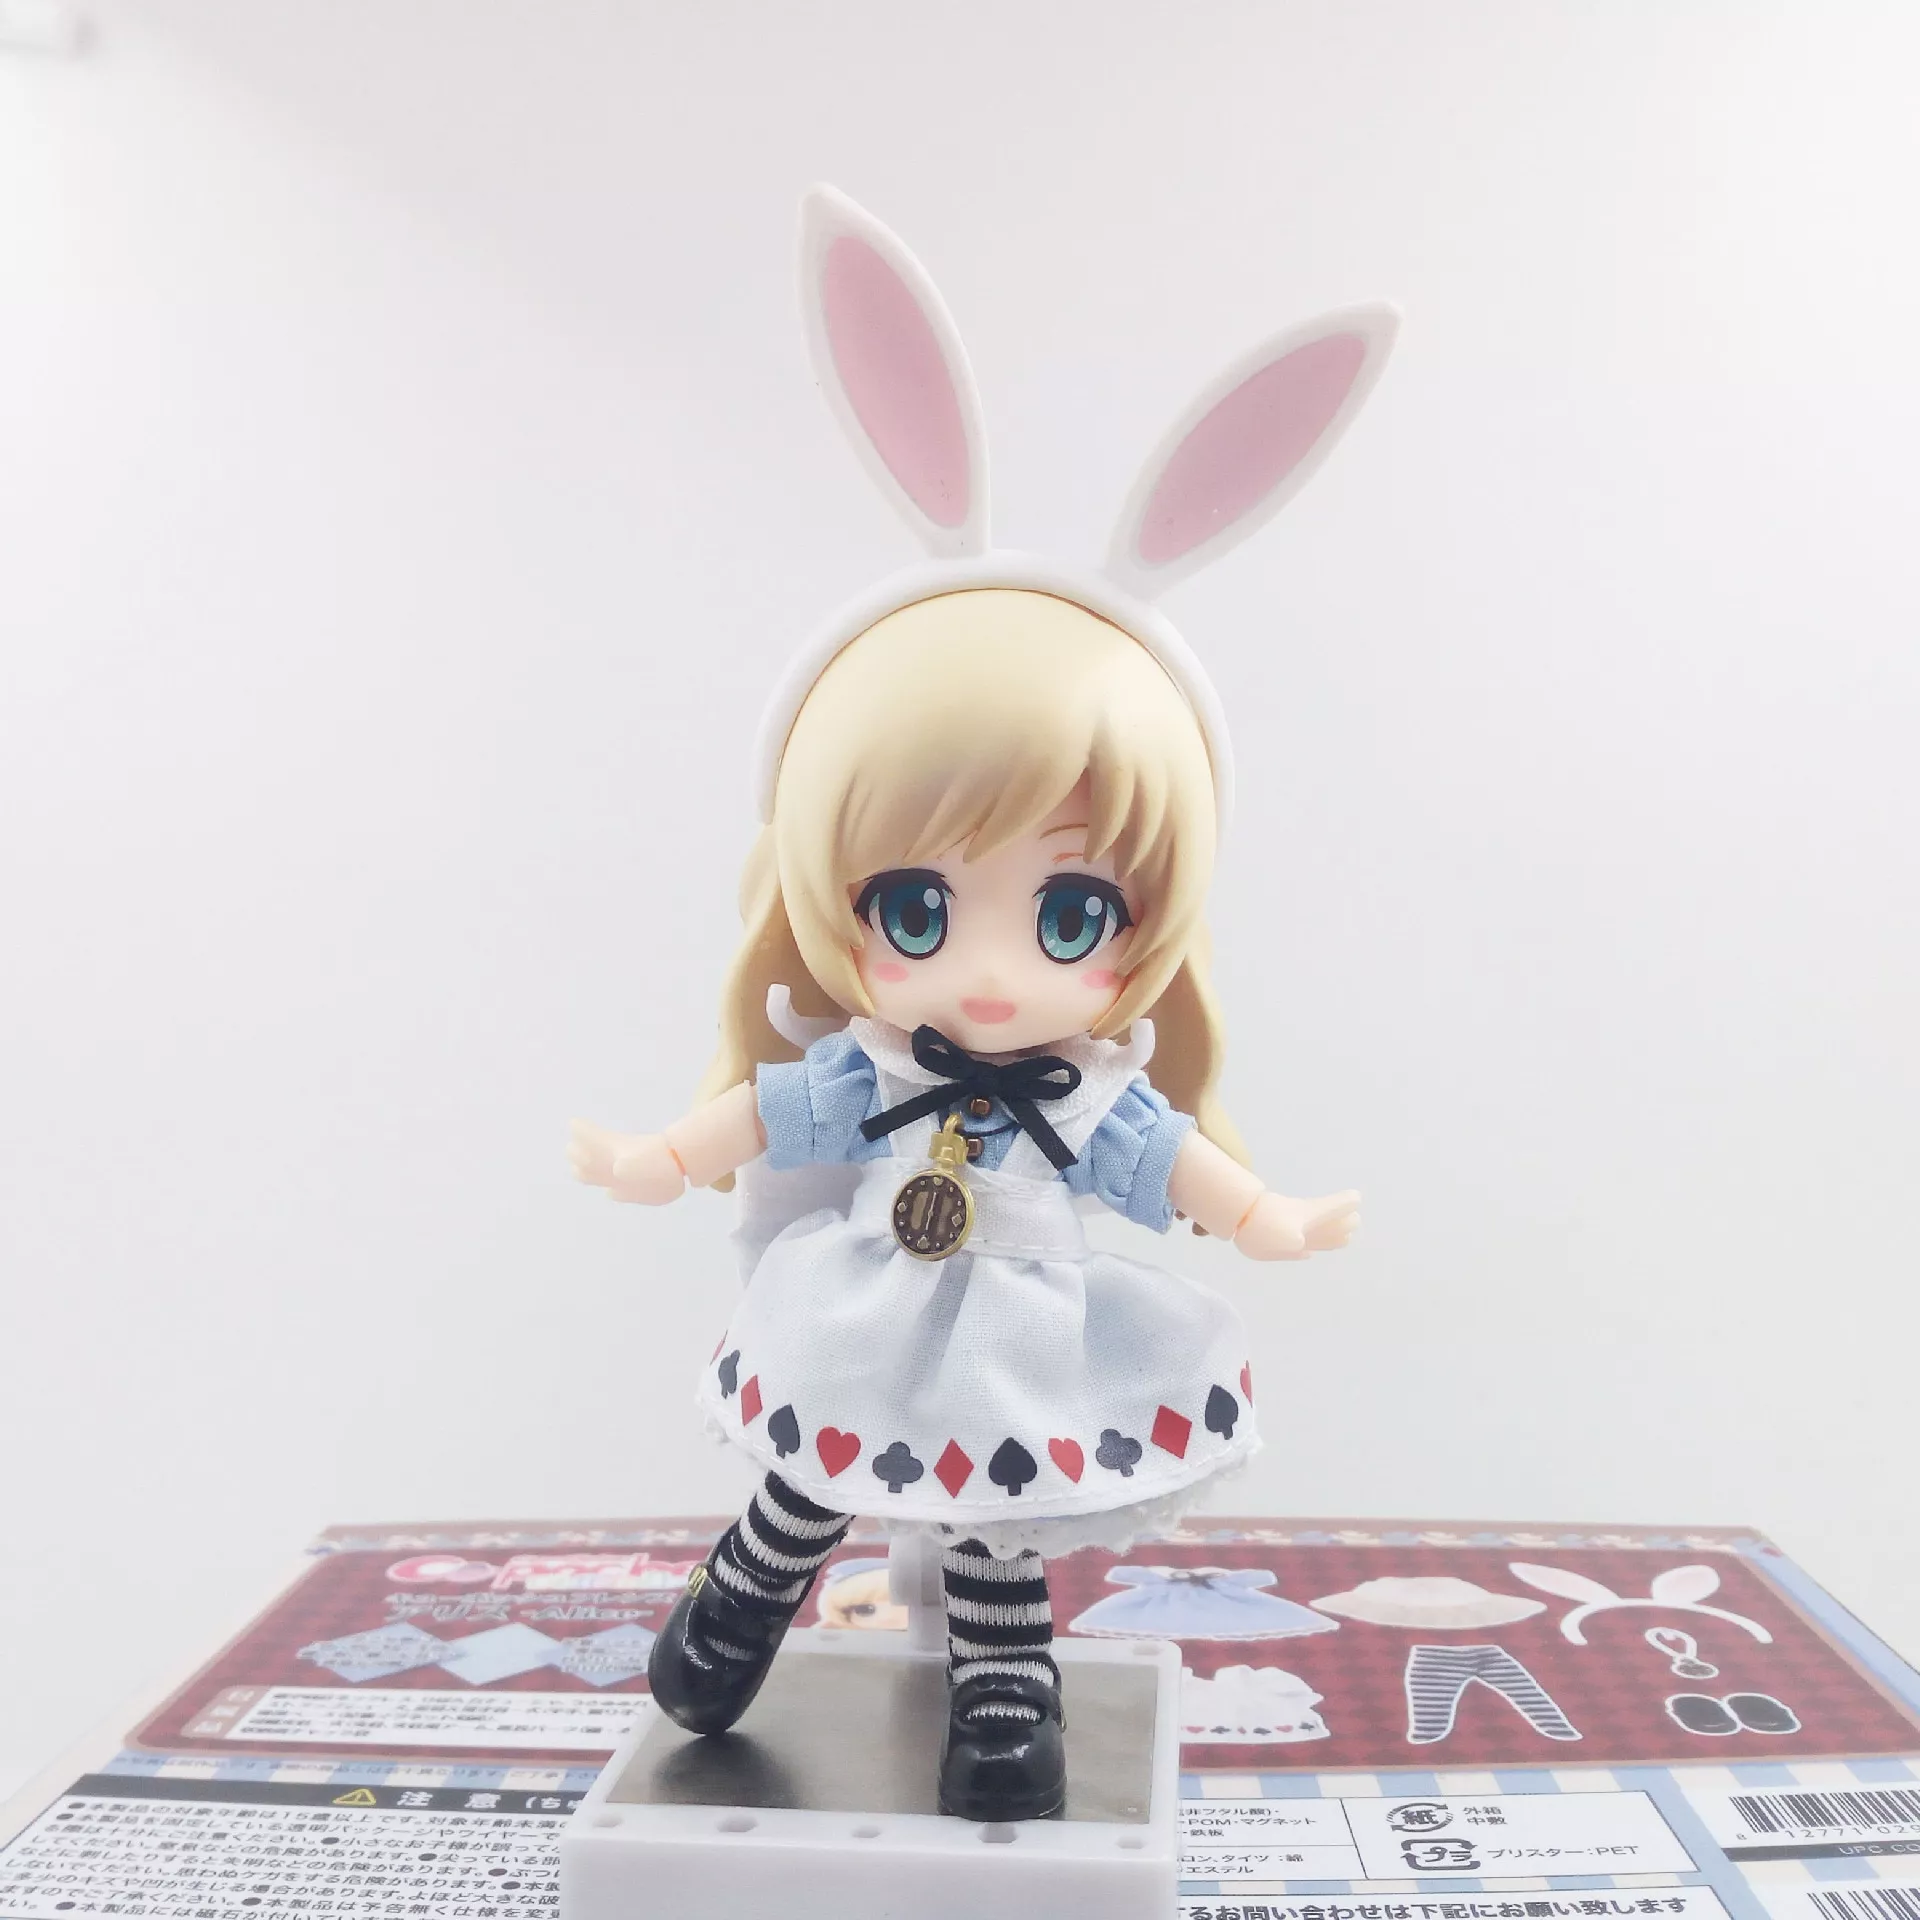 Cu-poche-friends-Alice-Bunny-Doll-PVC-Action-Figure-Collectible-Model-Toy-13CM-4000668701334-4